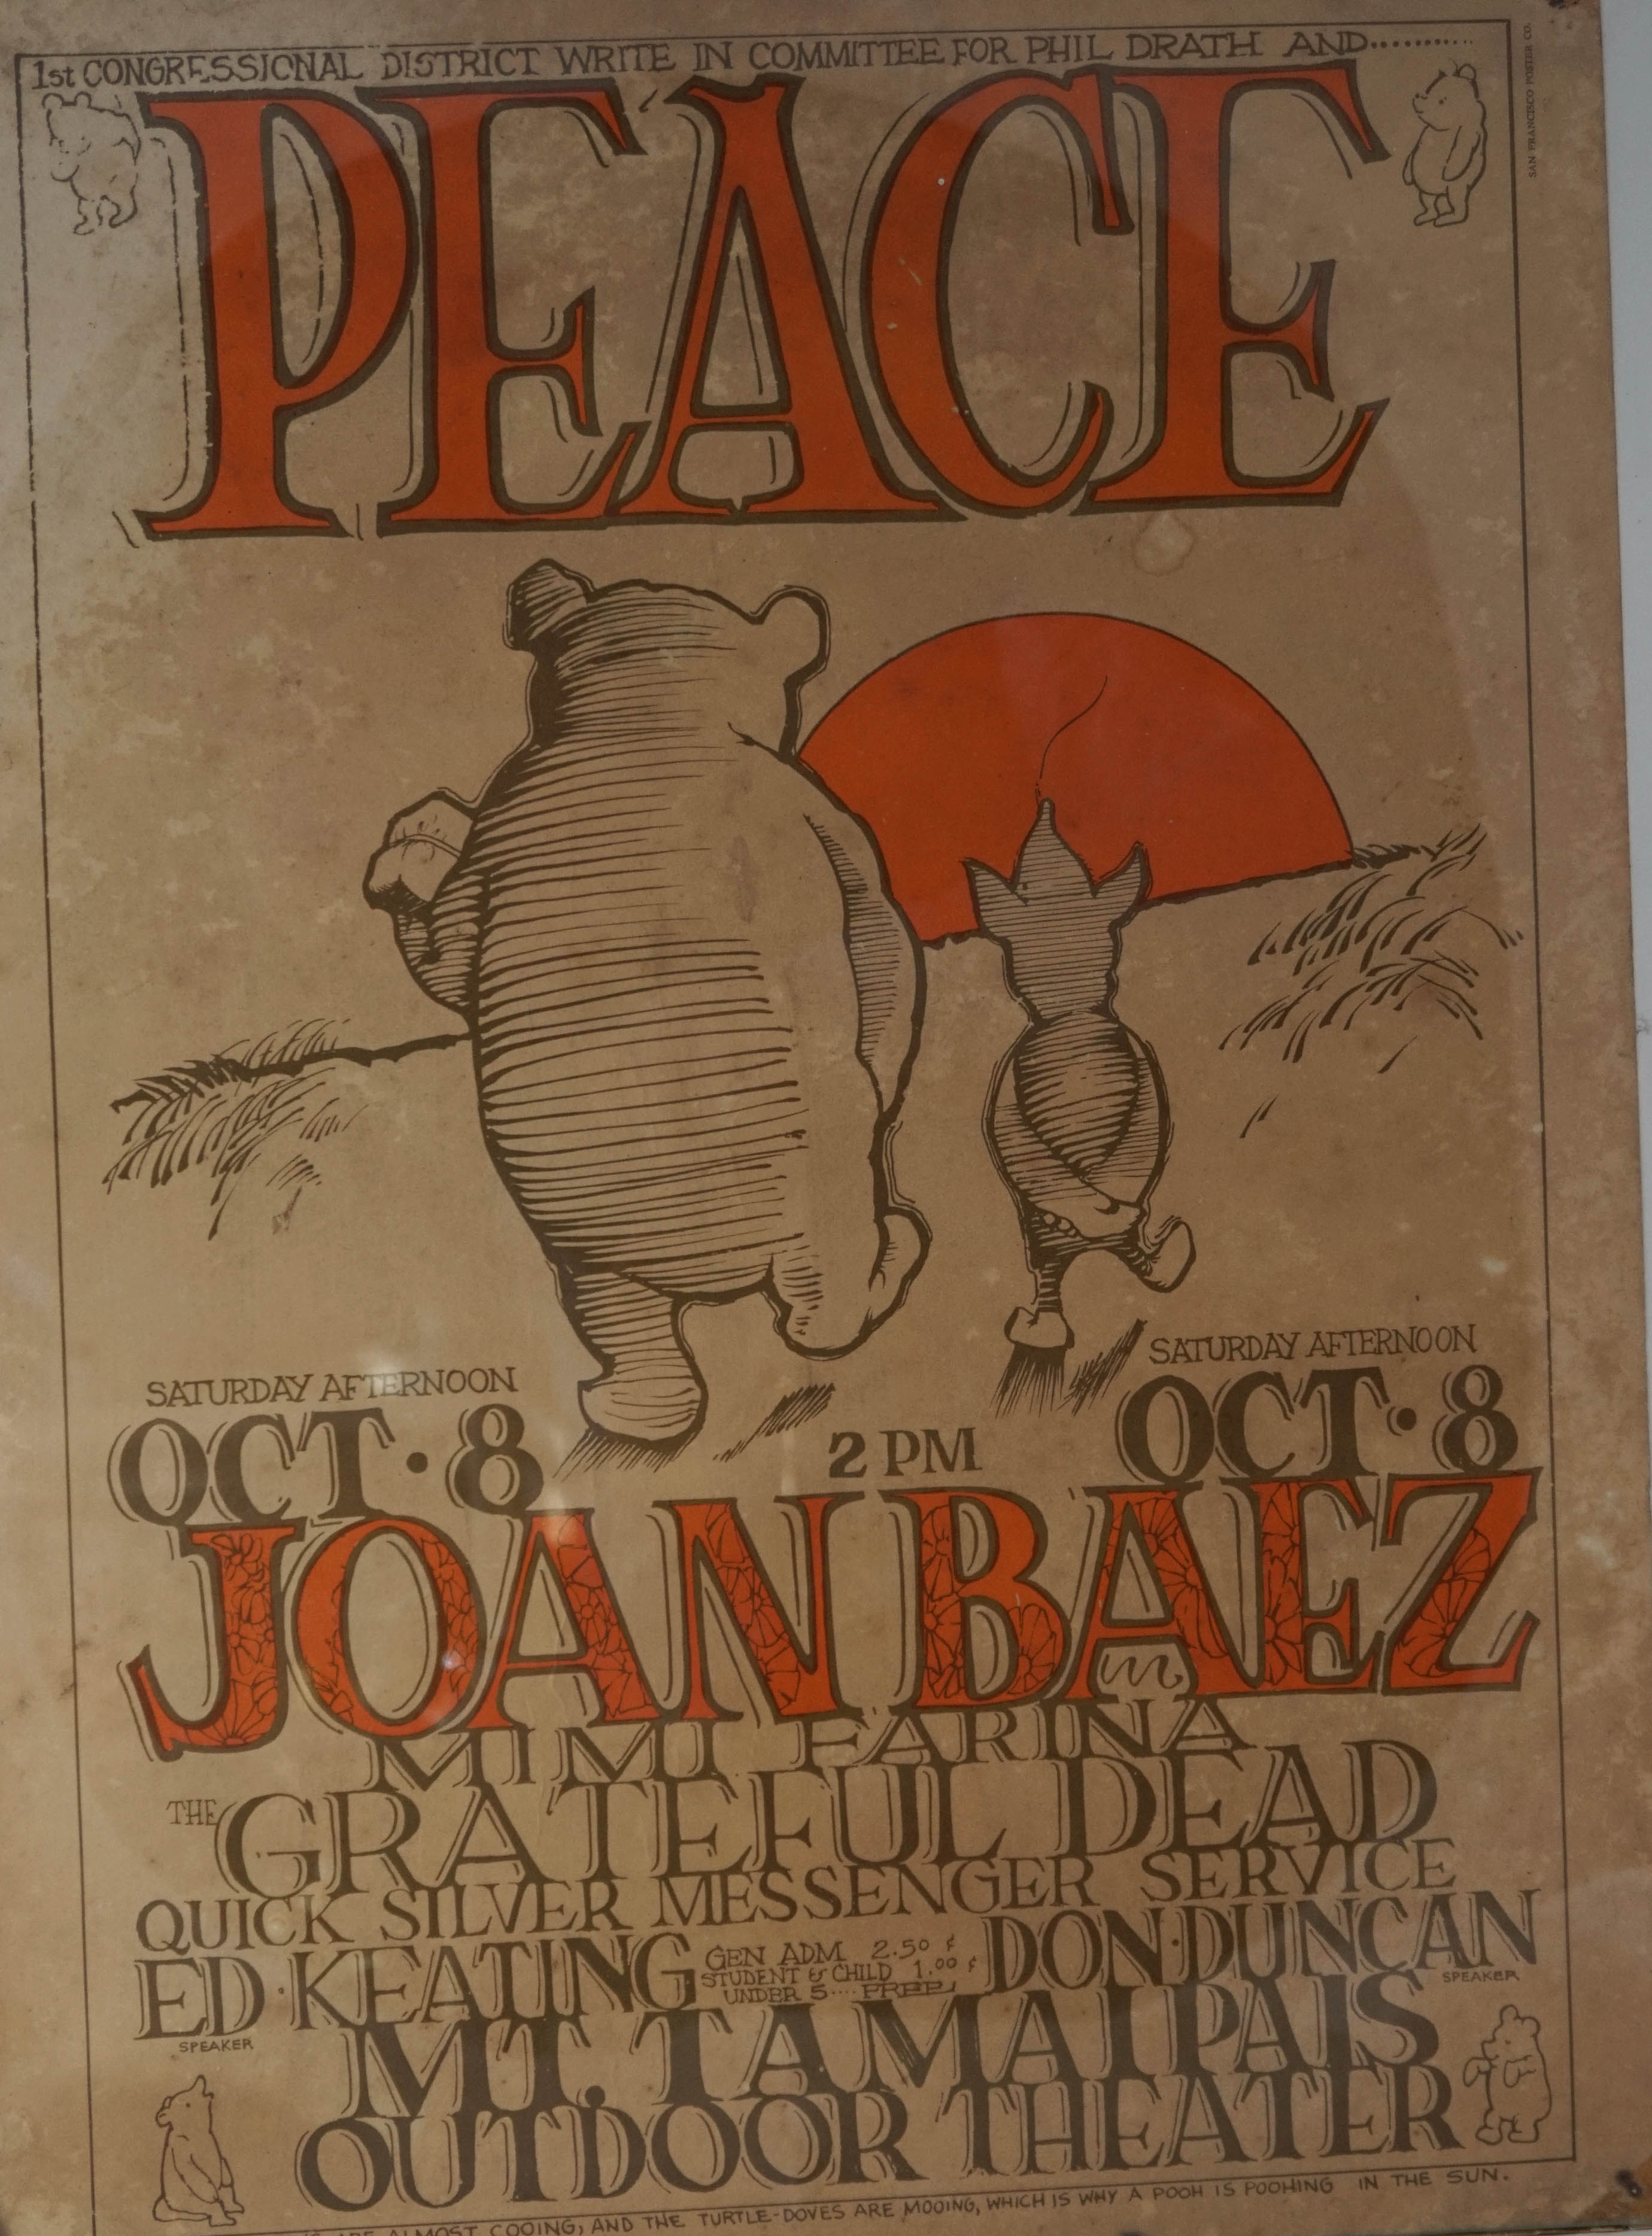 A Concert Poster for Joan Baez with Mimi Farina, Grateful Dead and Quicksilver Messenger Service, at